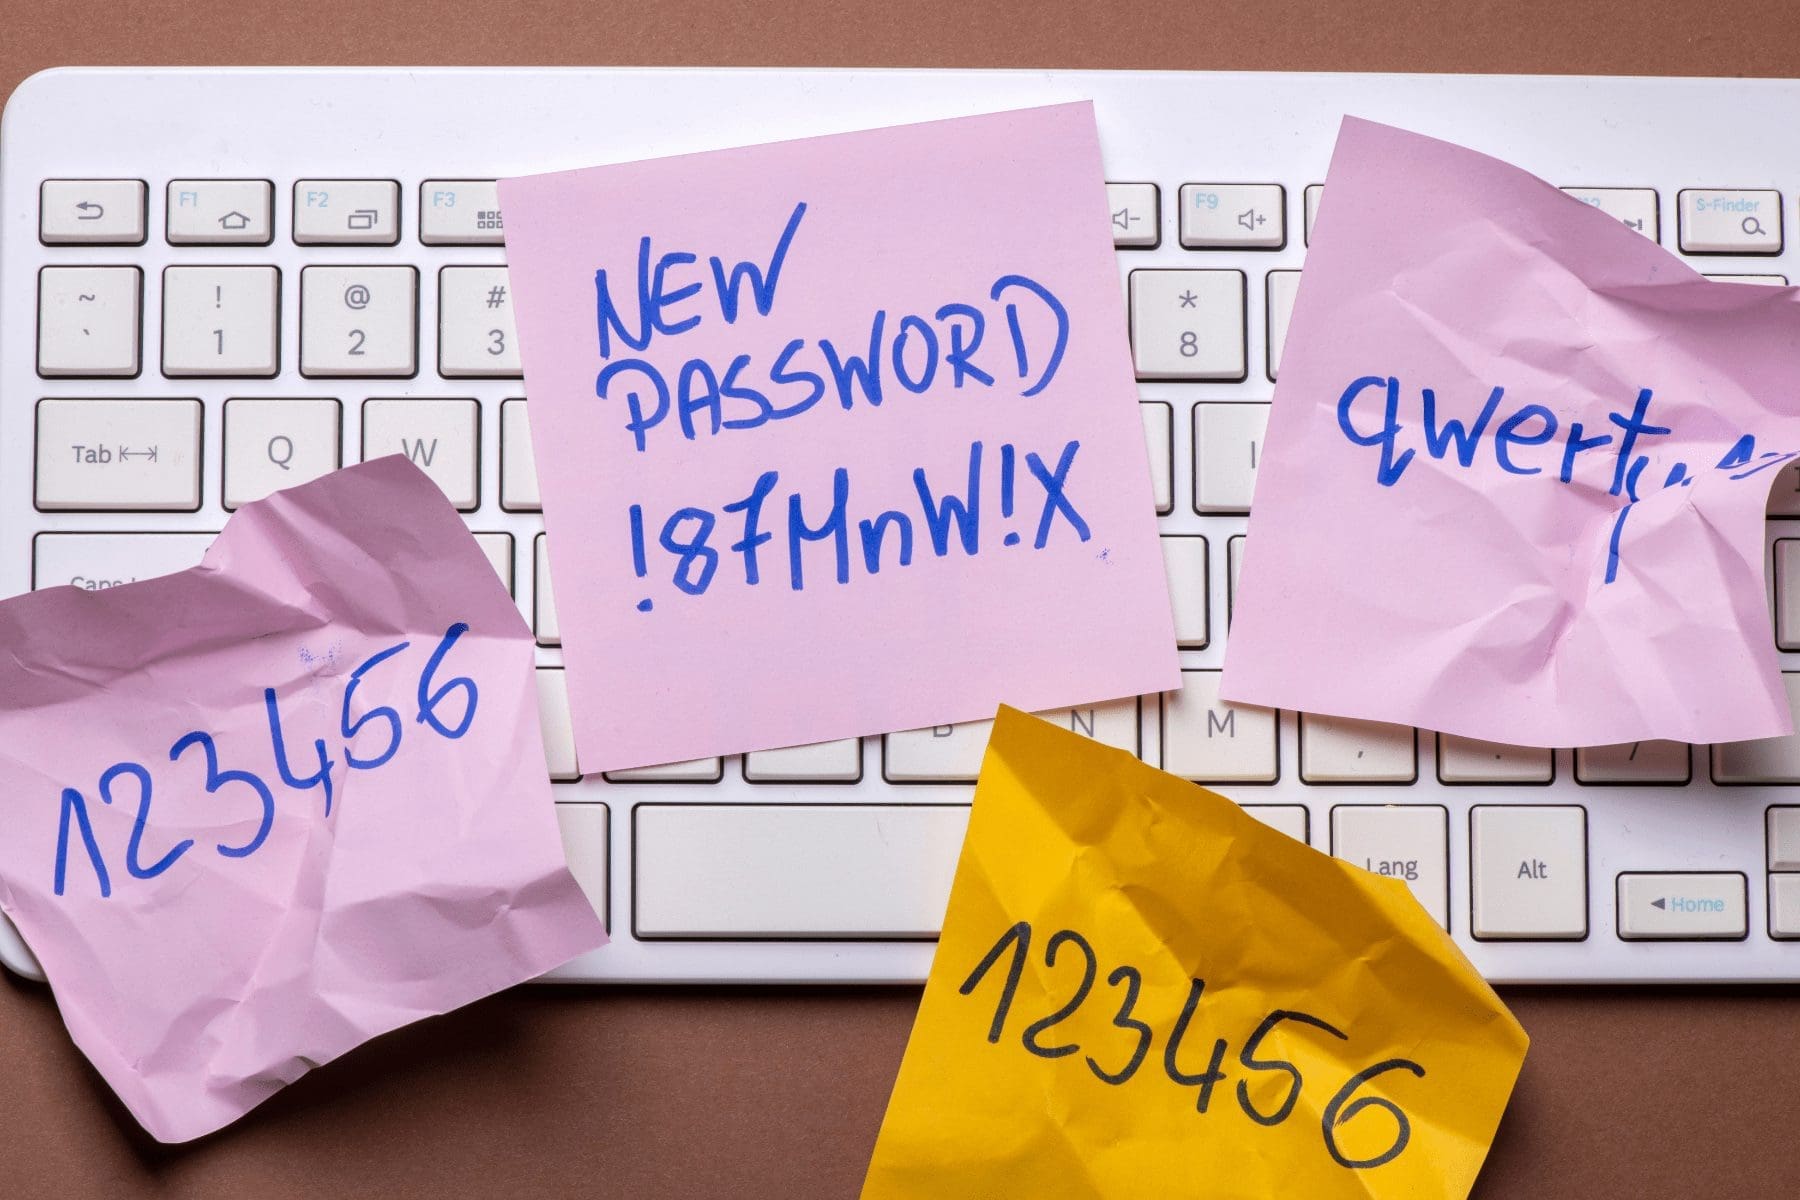 post its of some common passwords on a keyboard that could lead to a password attack